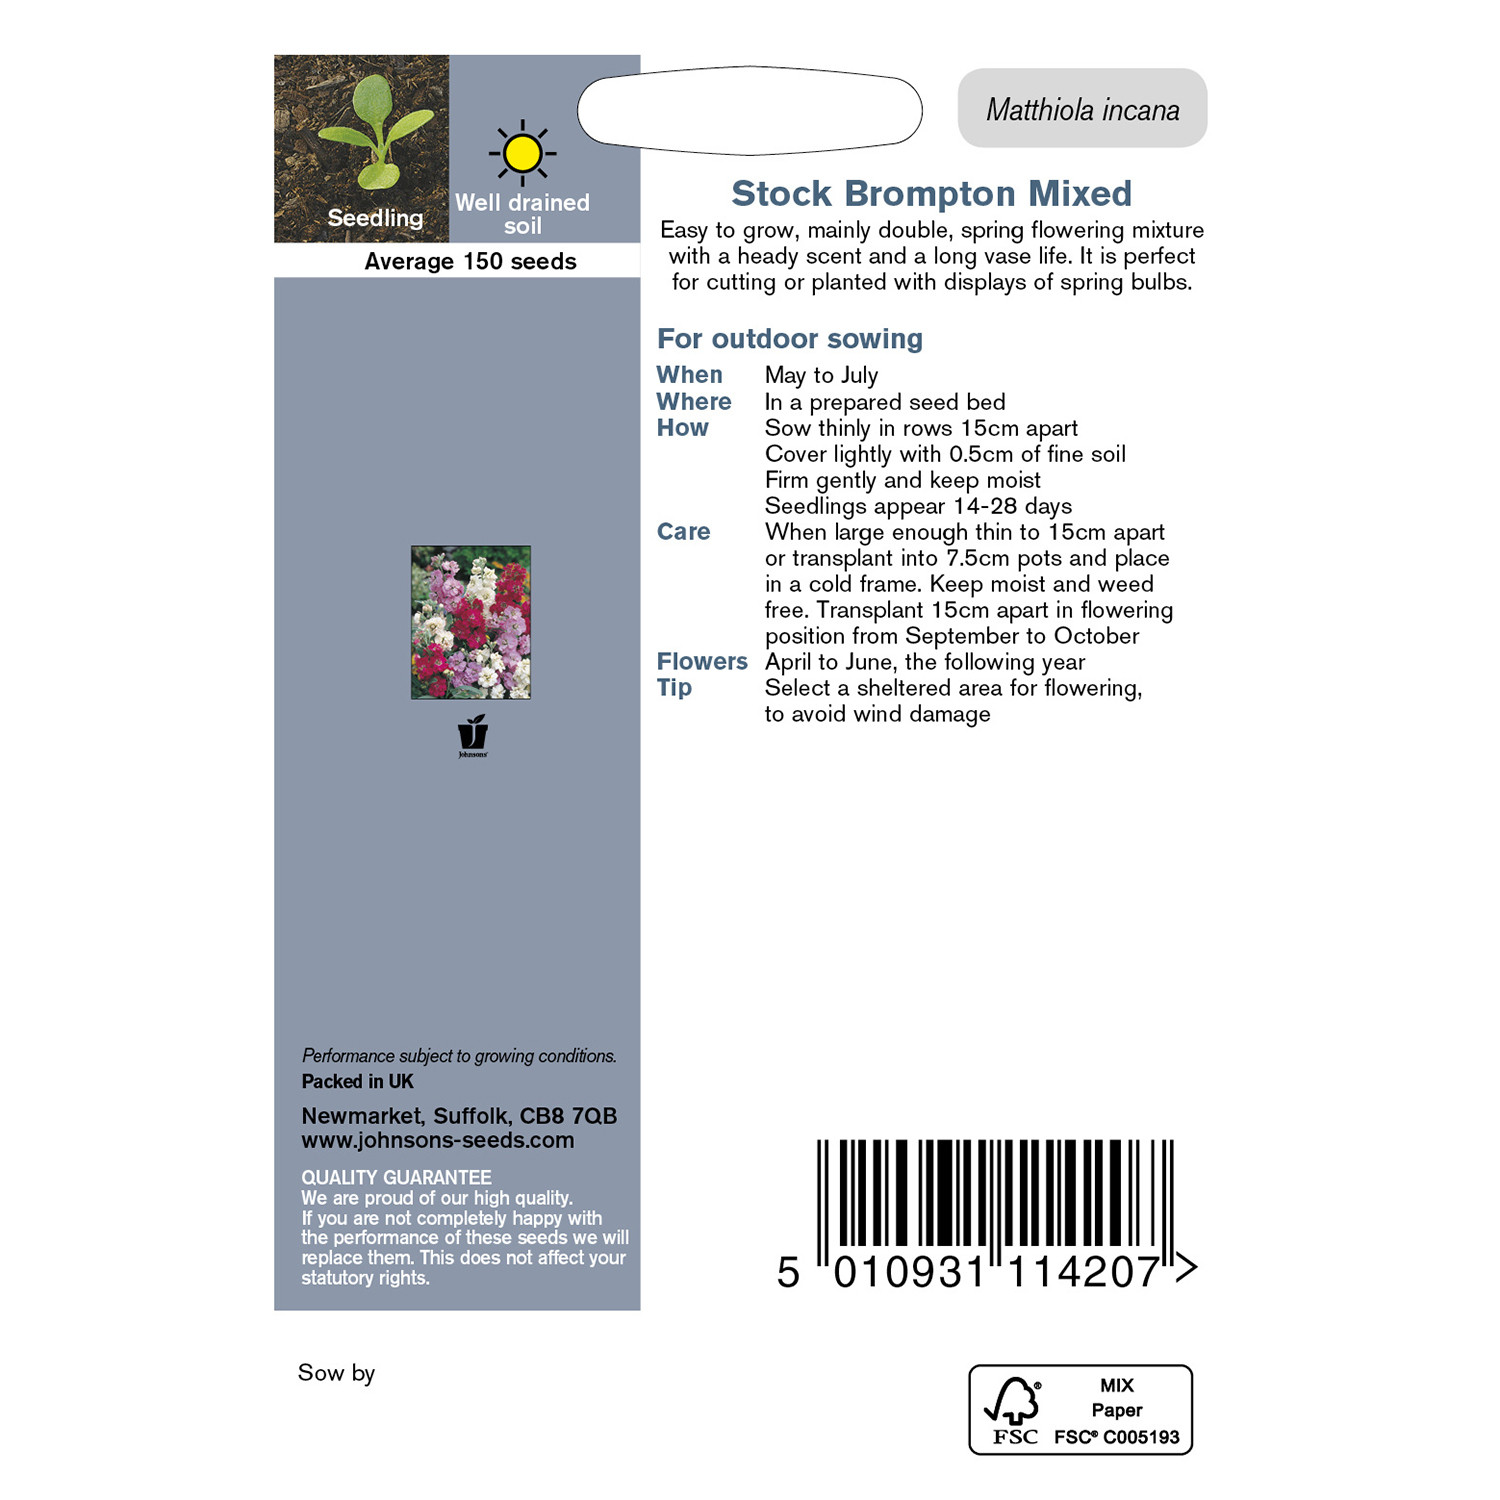 Pack of Brompton Mixed Stock Flower Seeds Image 2